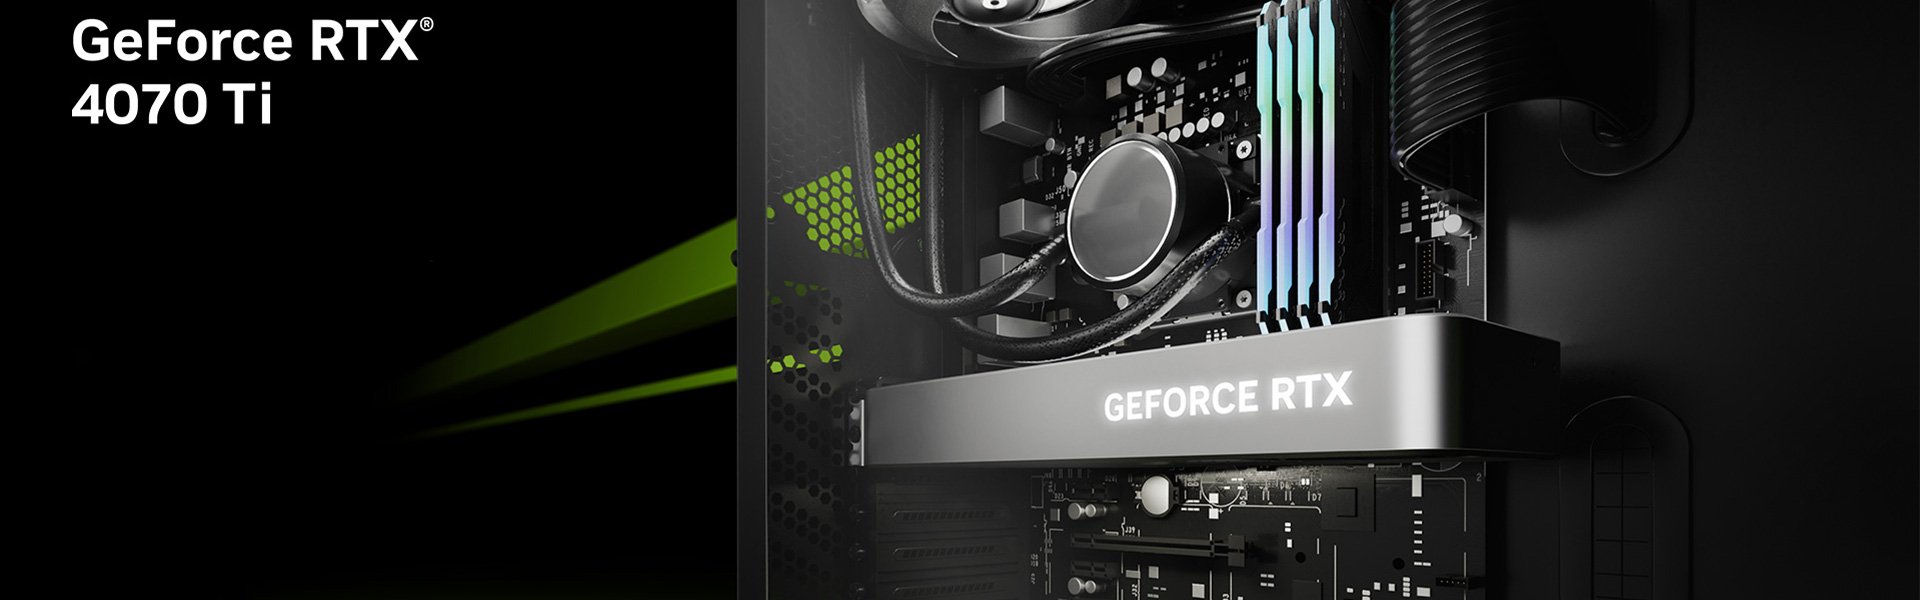 Newegg Now Offering NVIDIA GeForce RTX 4070 Ti Graphics Cards